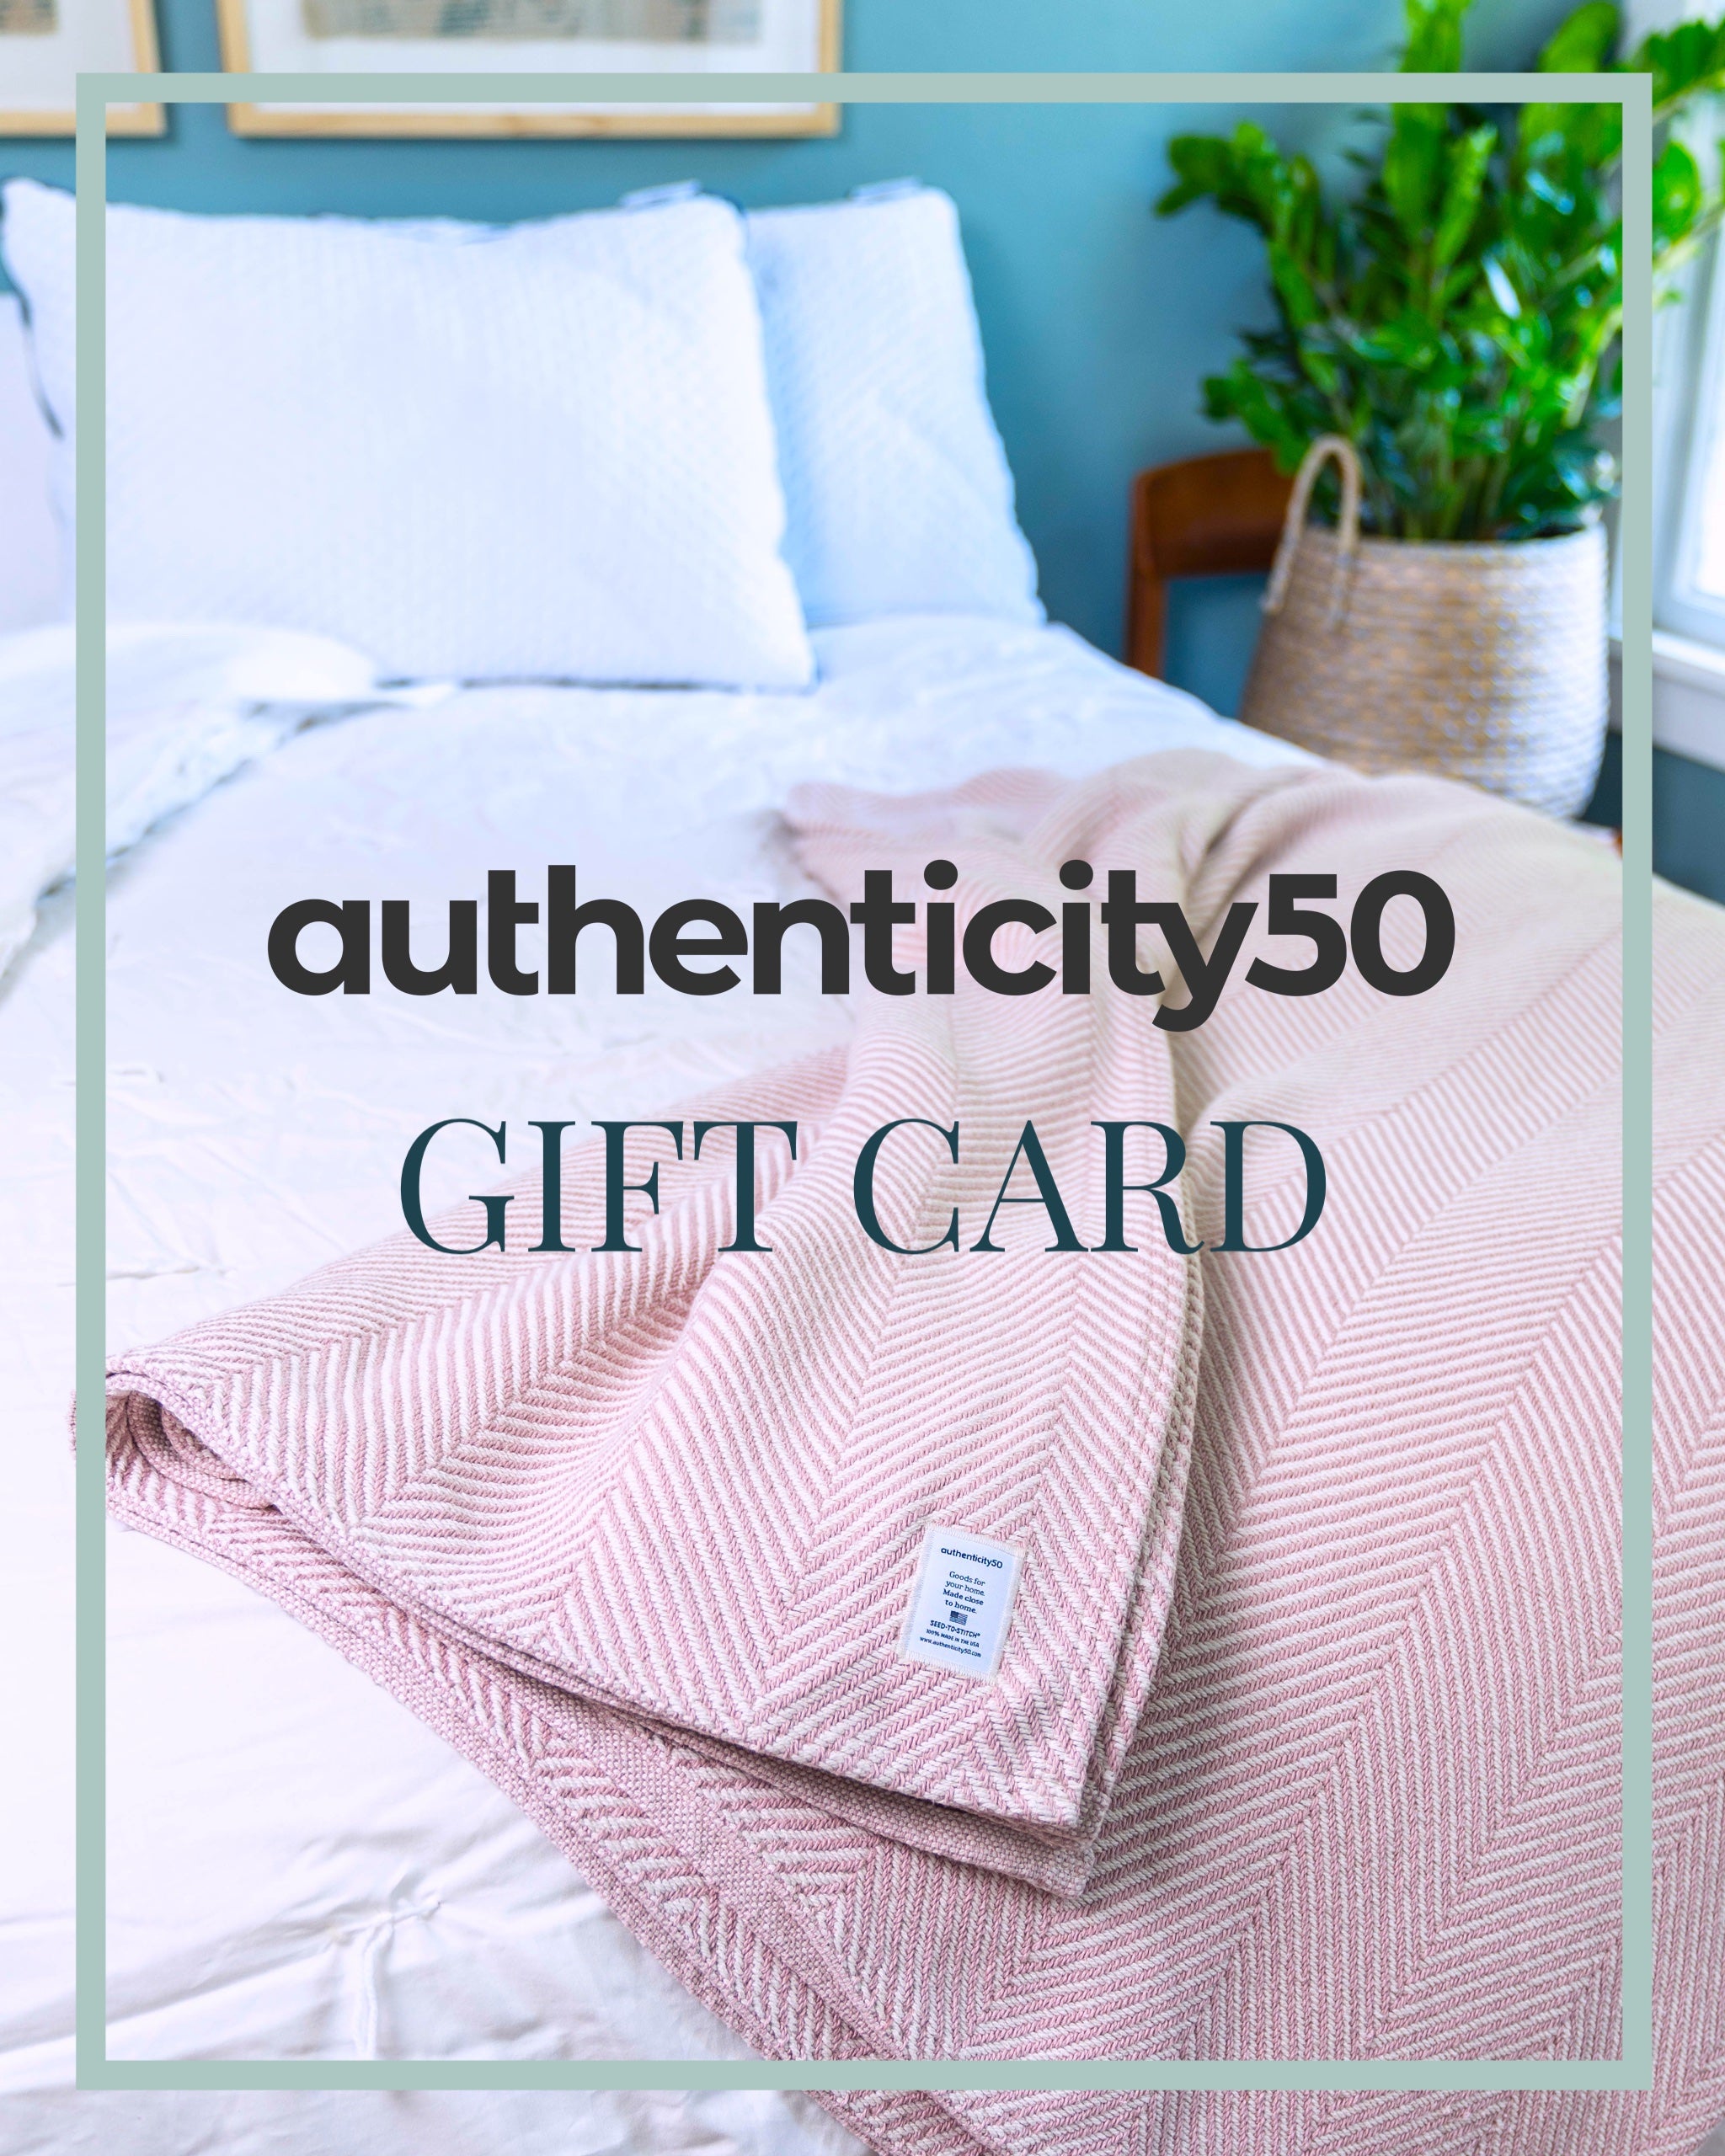 Authenticity50 gift card image.